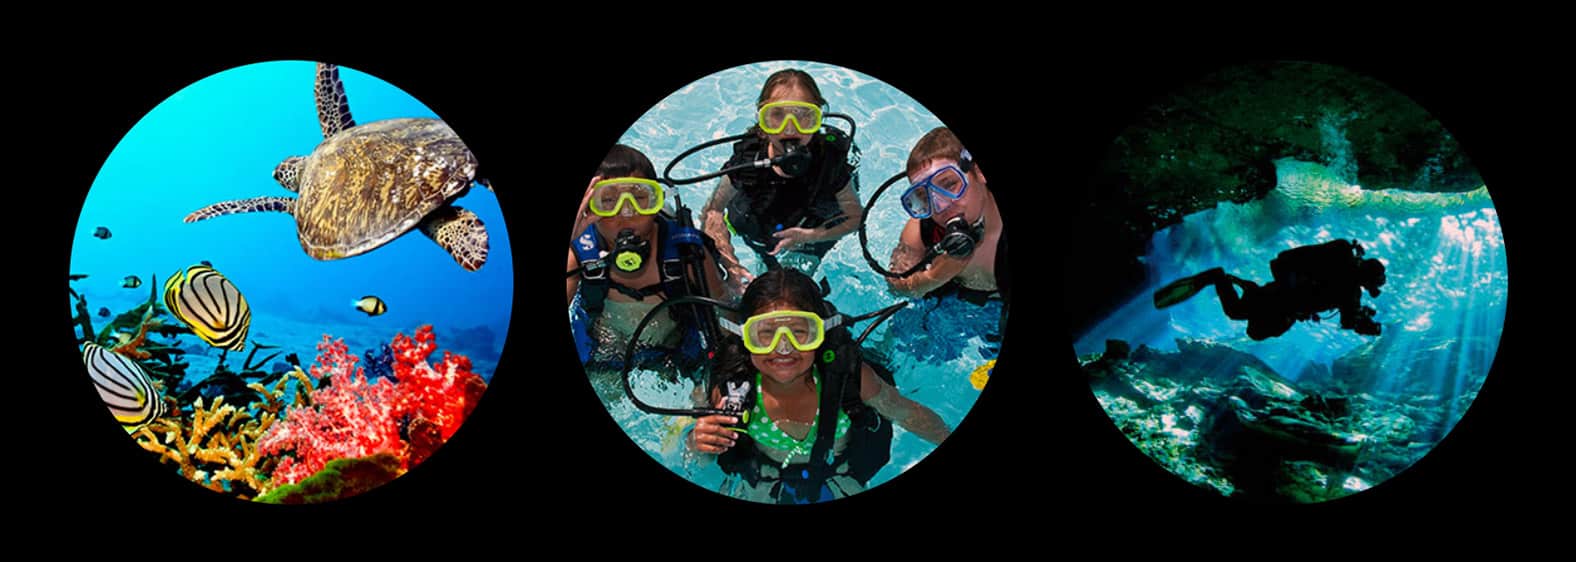 Cozumel Scuba School offers exceptional scuba training, scuba diving excursions, and other scuba activities at virtually every conceivable level, and for every possible interest.